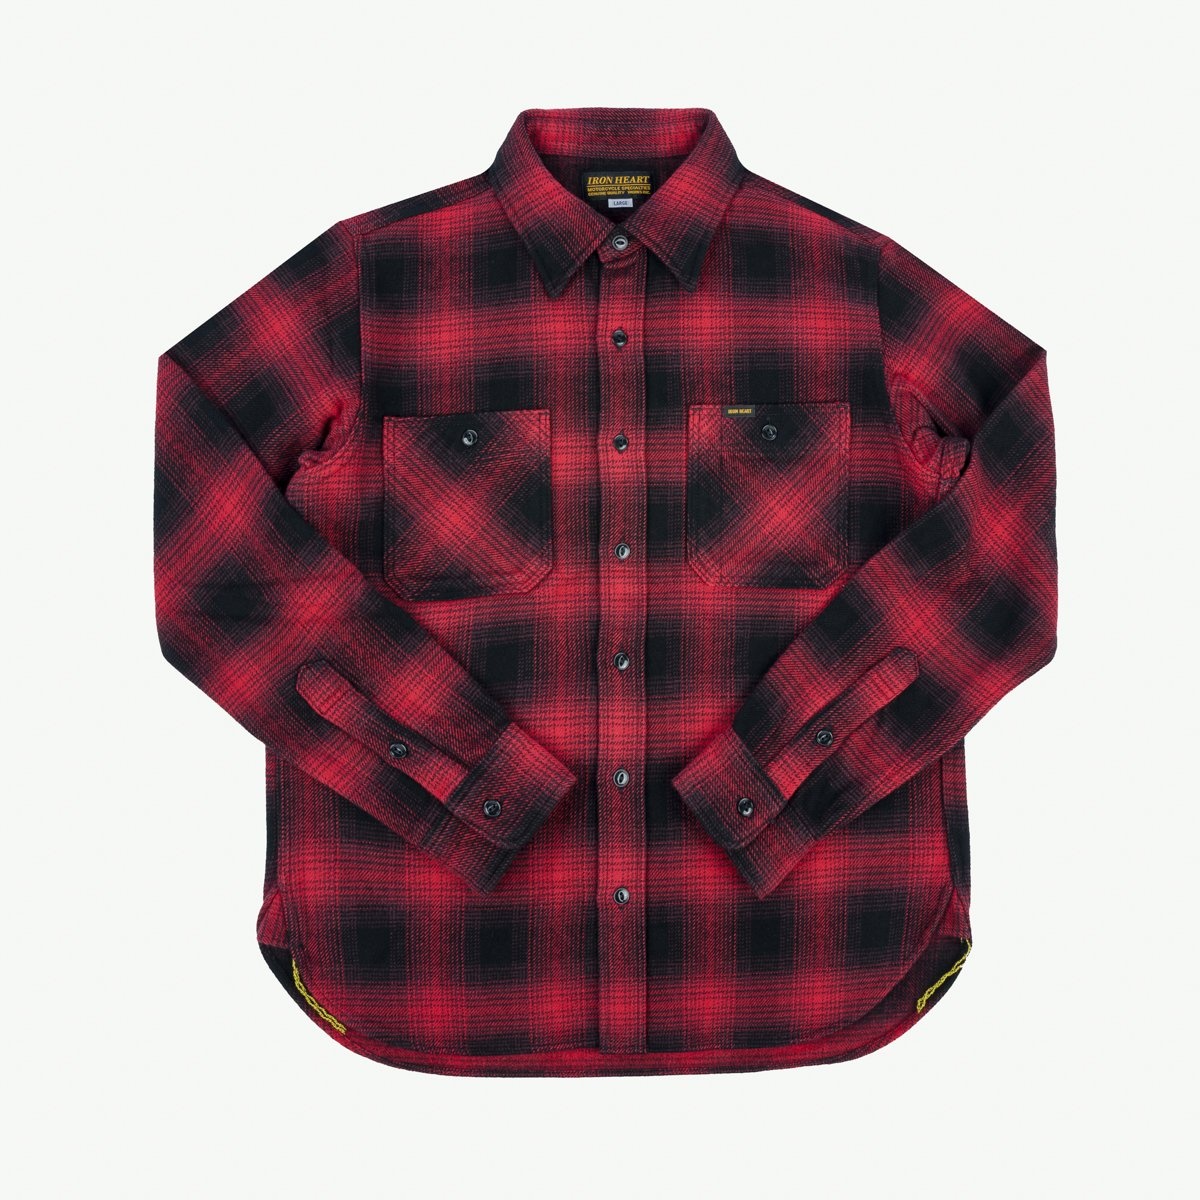 IHSH-265-RED Ultra Heavy Flannel Ombré Check Work Shirt - Red/Black - 1